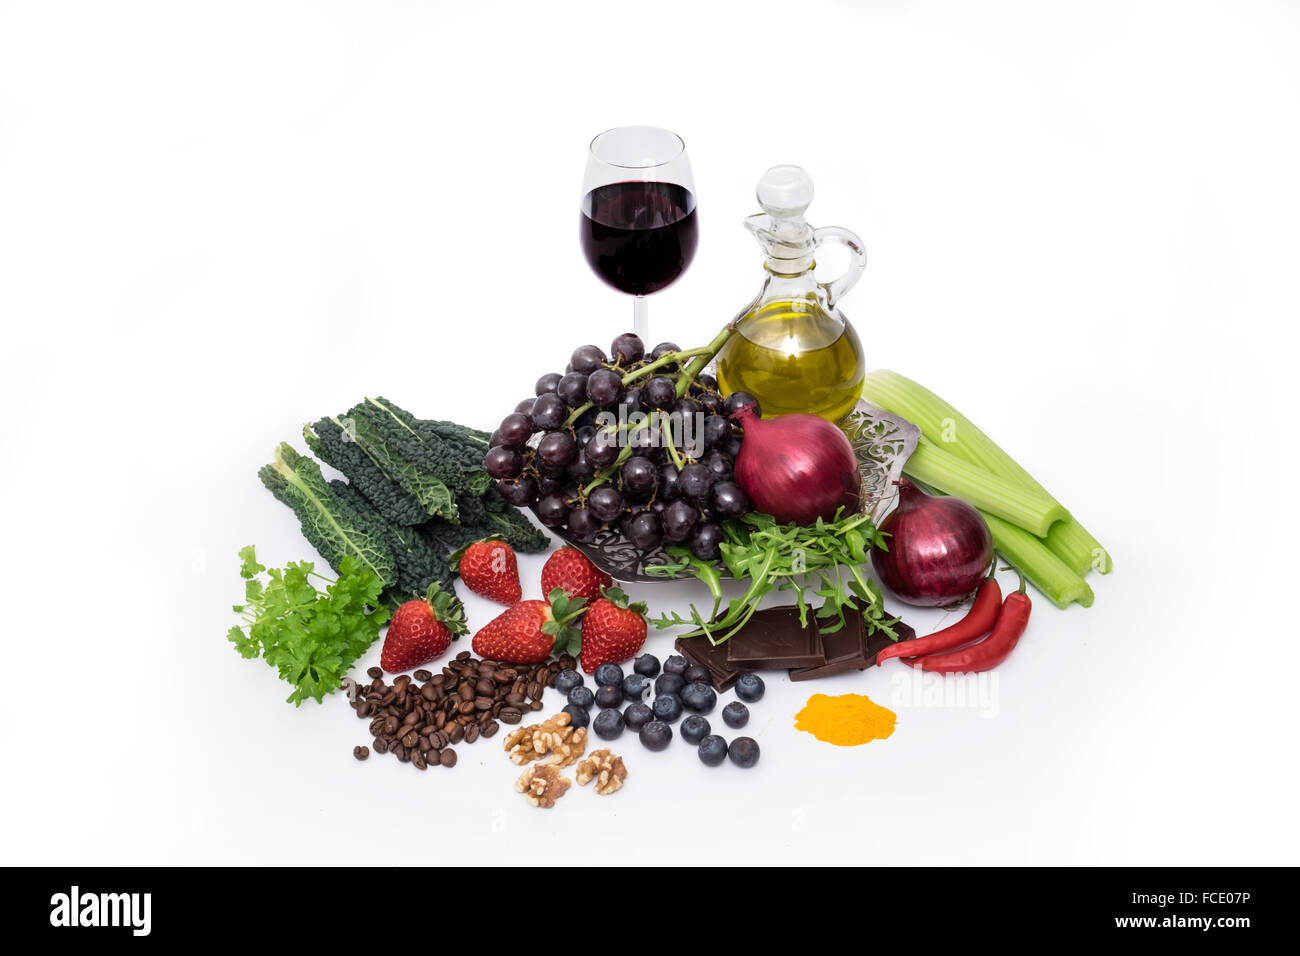 Healthy diet food ingredients for the sirtfood diet Stock Photo